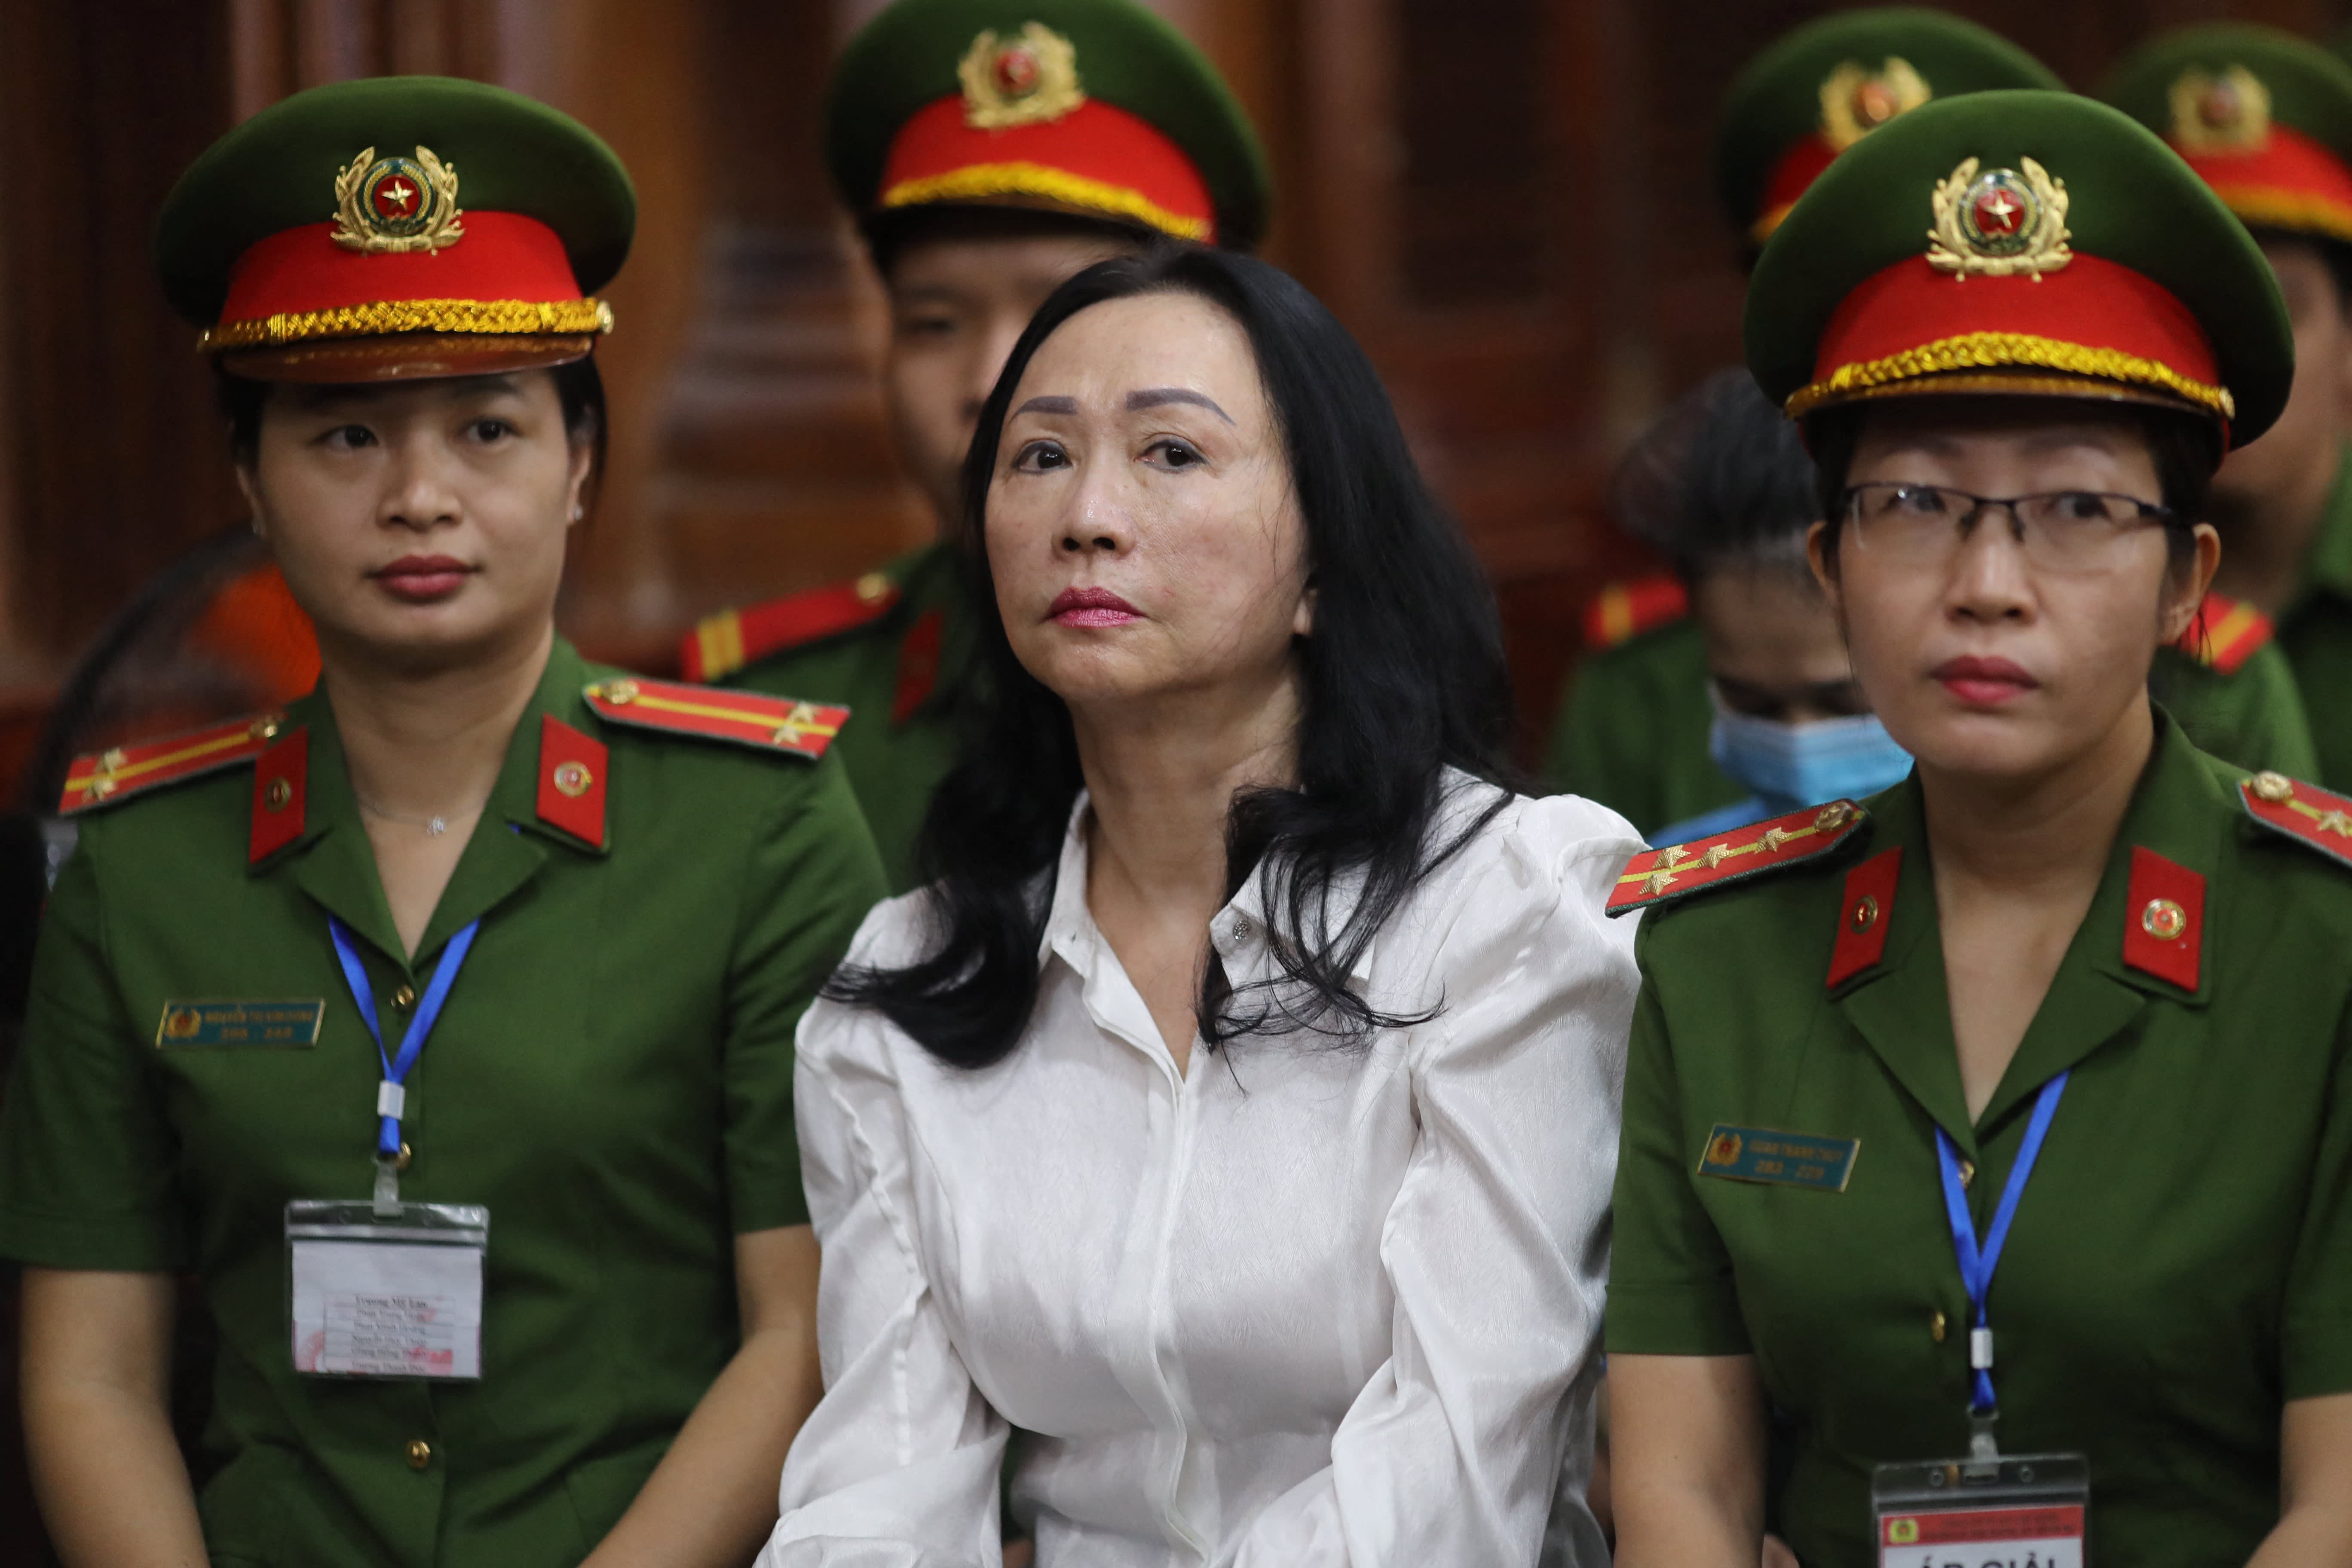 A Vietnamese real estate tycoon has been sentenced to death in a fraud case